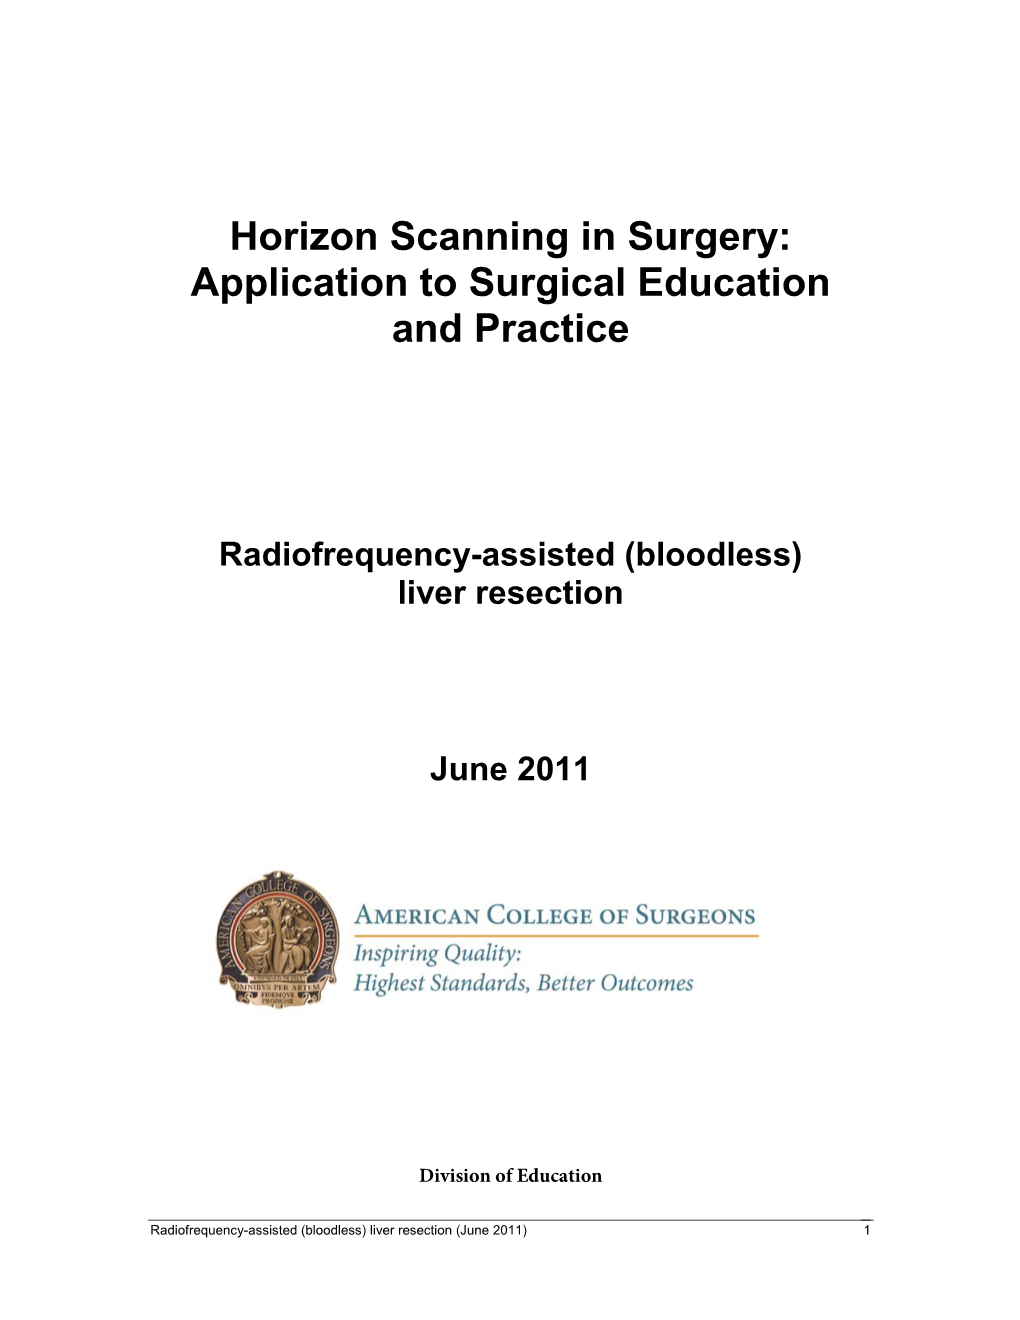 Radiofrequency-Assisted (Bloodless) Liver Resection June 2011